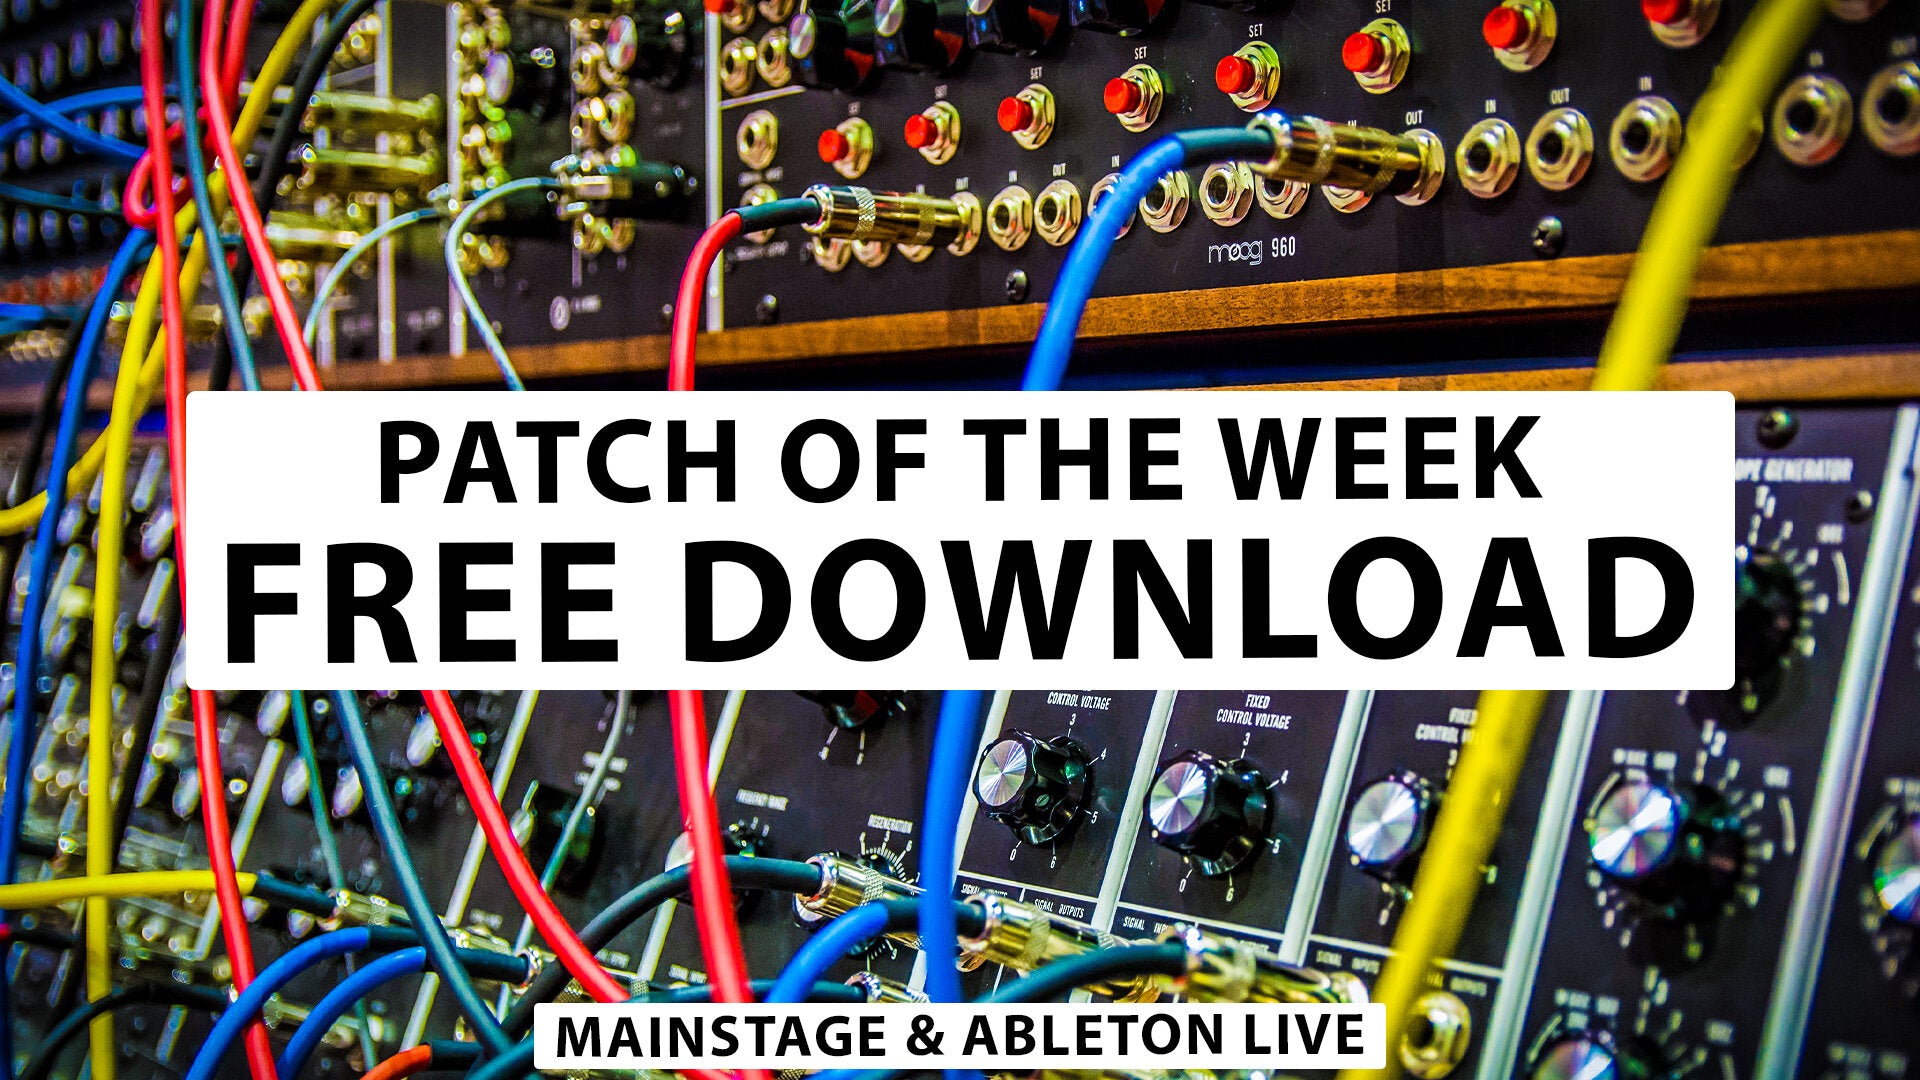 Marching Squares - Free MainStage & Ableton Worship Patch!